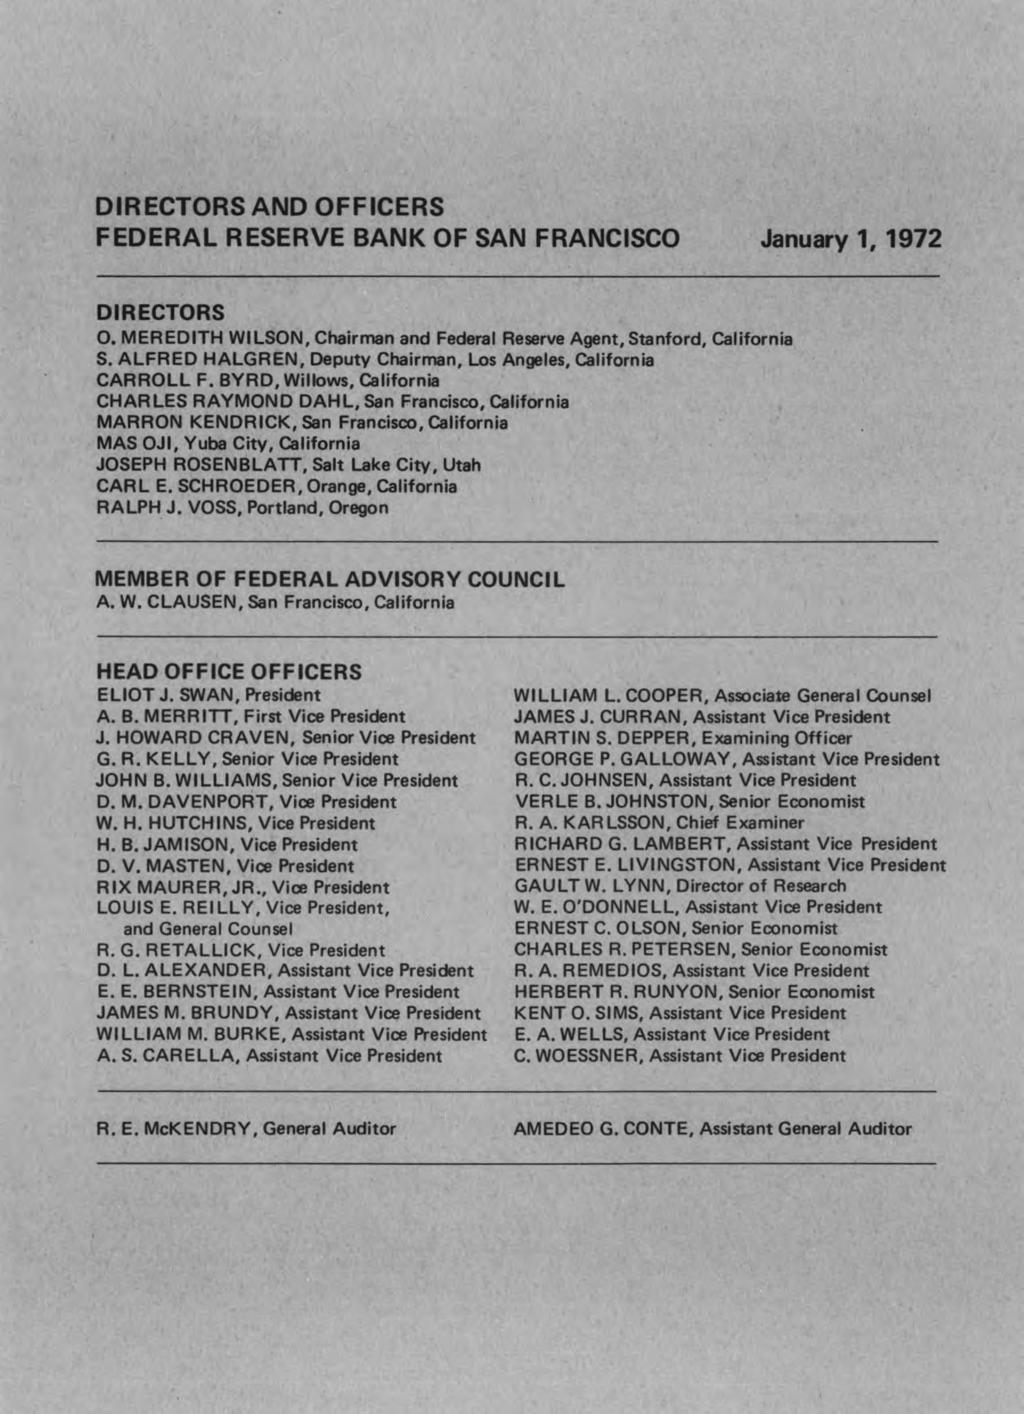 AND FEDERAL RESERVE BANK OF SAN FRANCISCO January 1, 1972 O. M E R E D IT H W ILSO N, Chairman and Federal Reserve Agent, Stanford, California S.